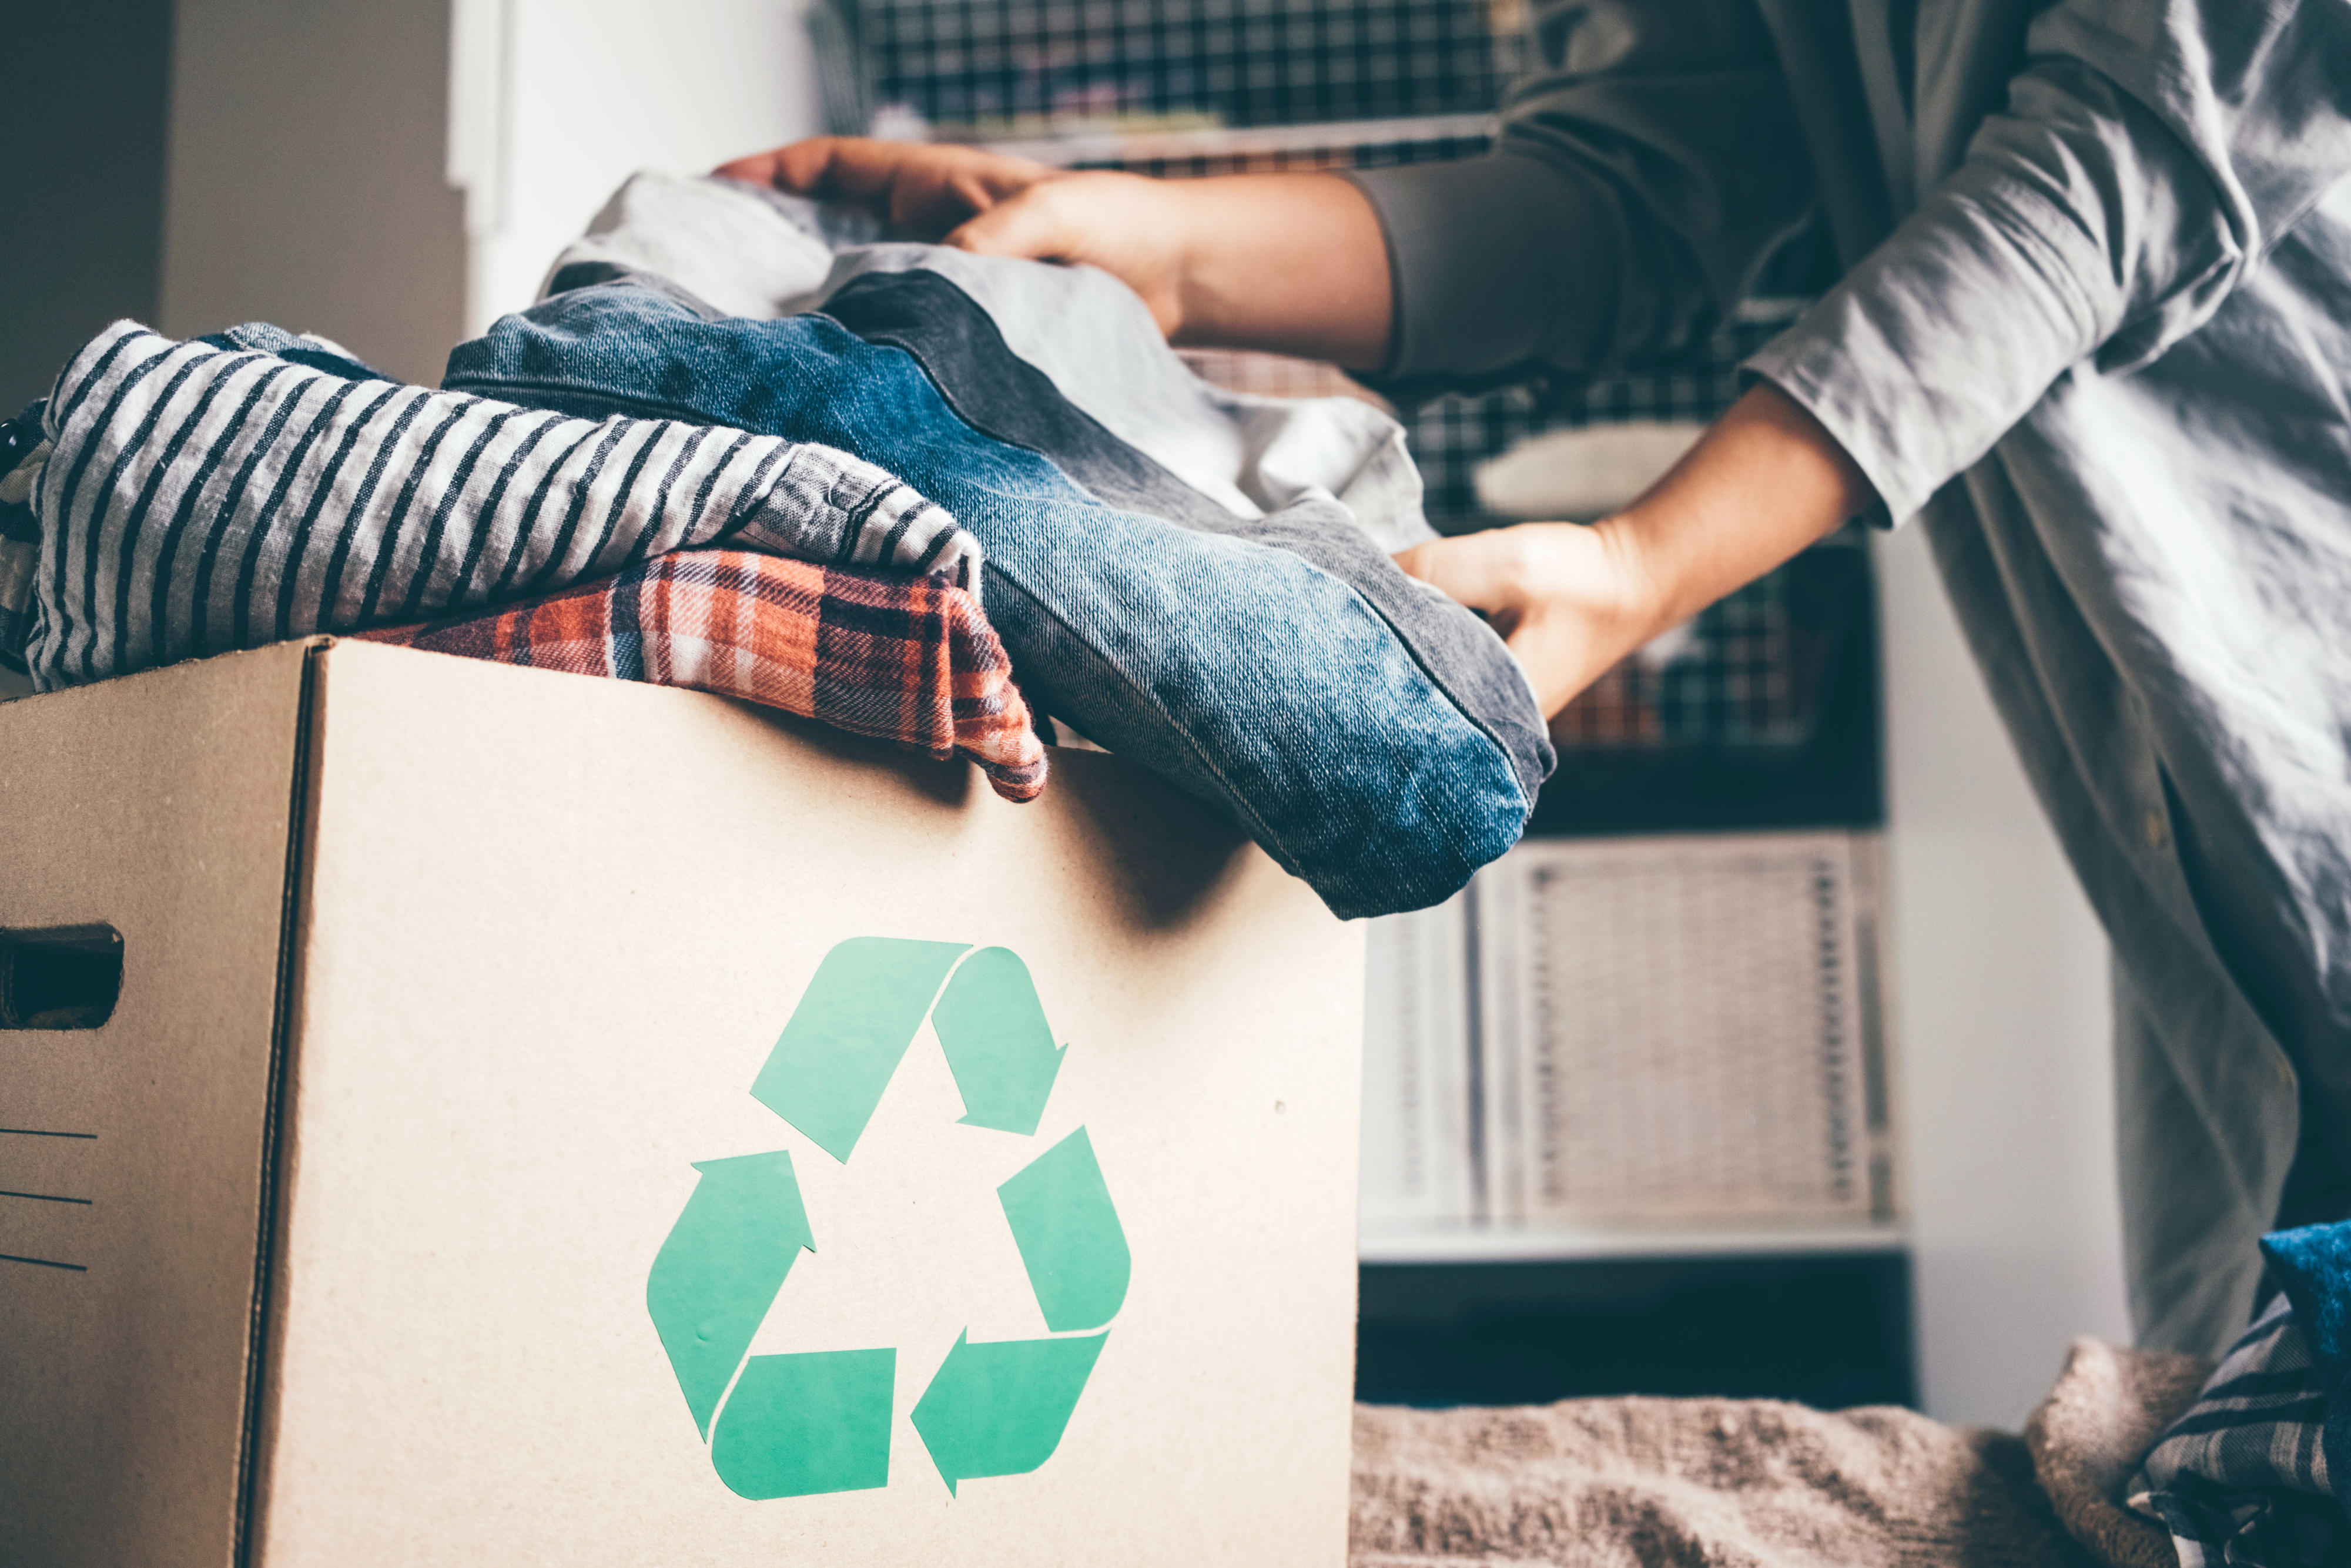 How Can Companies Recycle Clothes Back Into Clothes?